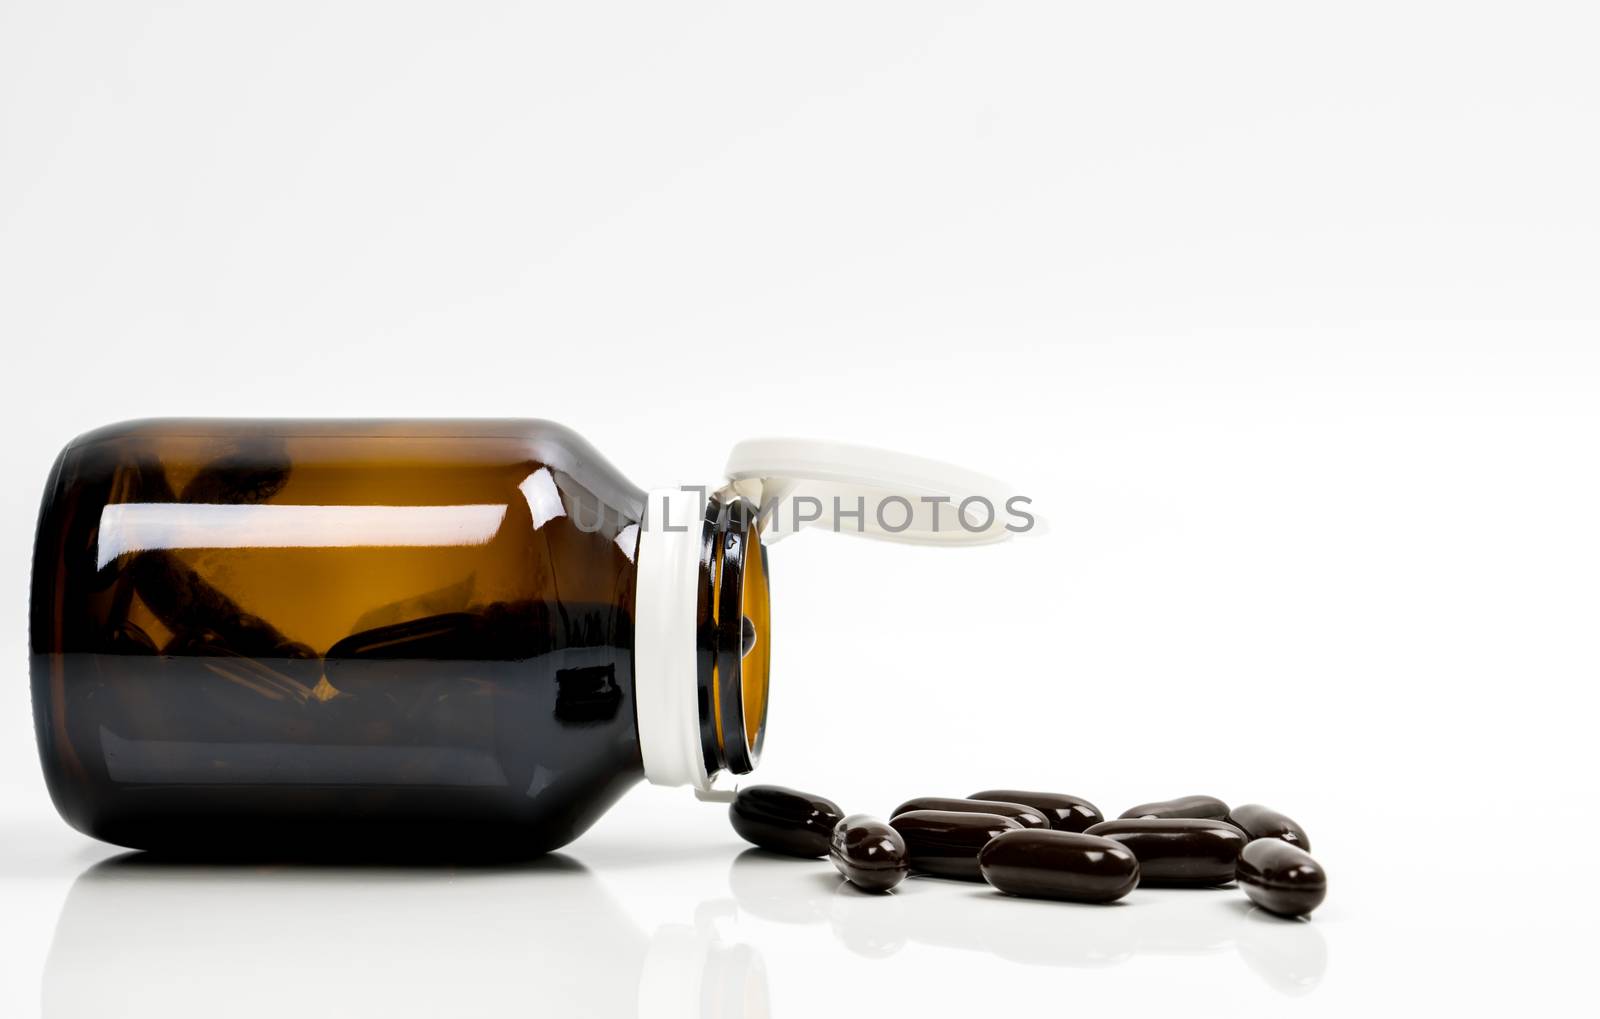 Multivitamins capsule pills for pregnant woman with amber bottle with blank label and copy space isolated on white background. Vitamins and supplements for hard working guy. Global healthcare concept by Fahroni